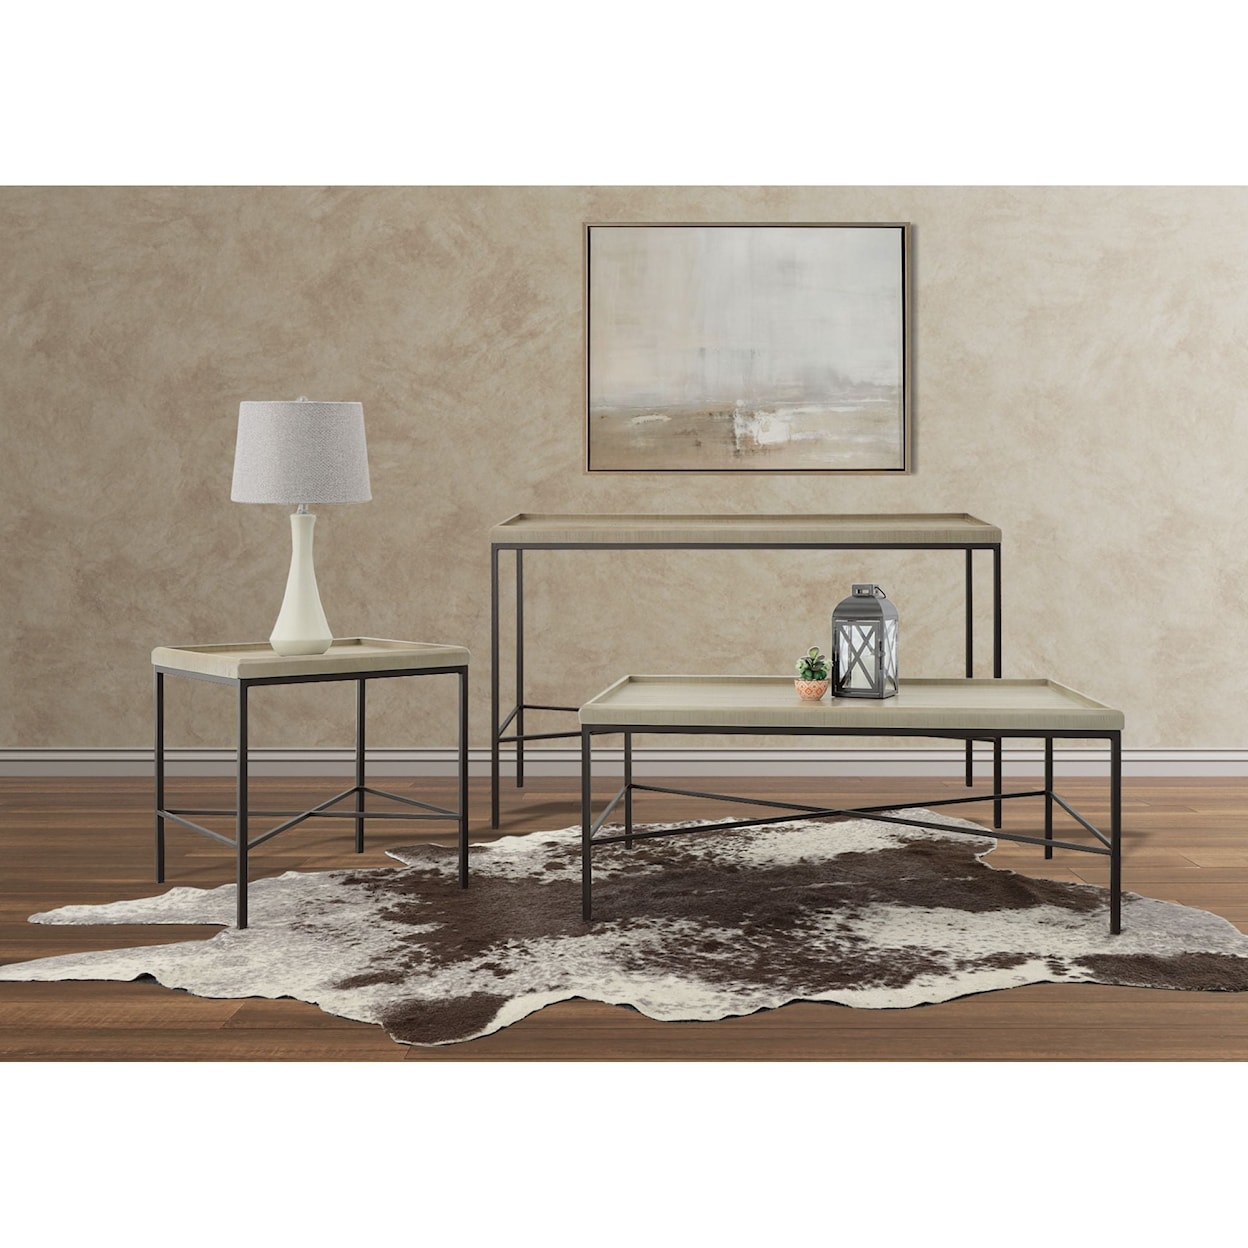 Elements International Timesch Natural Sofa Table with Metal Frame